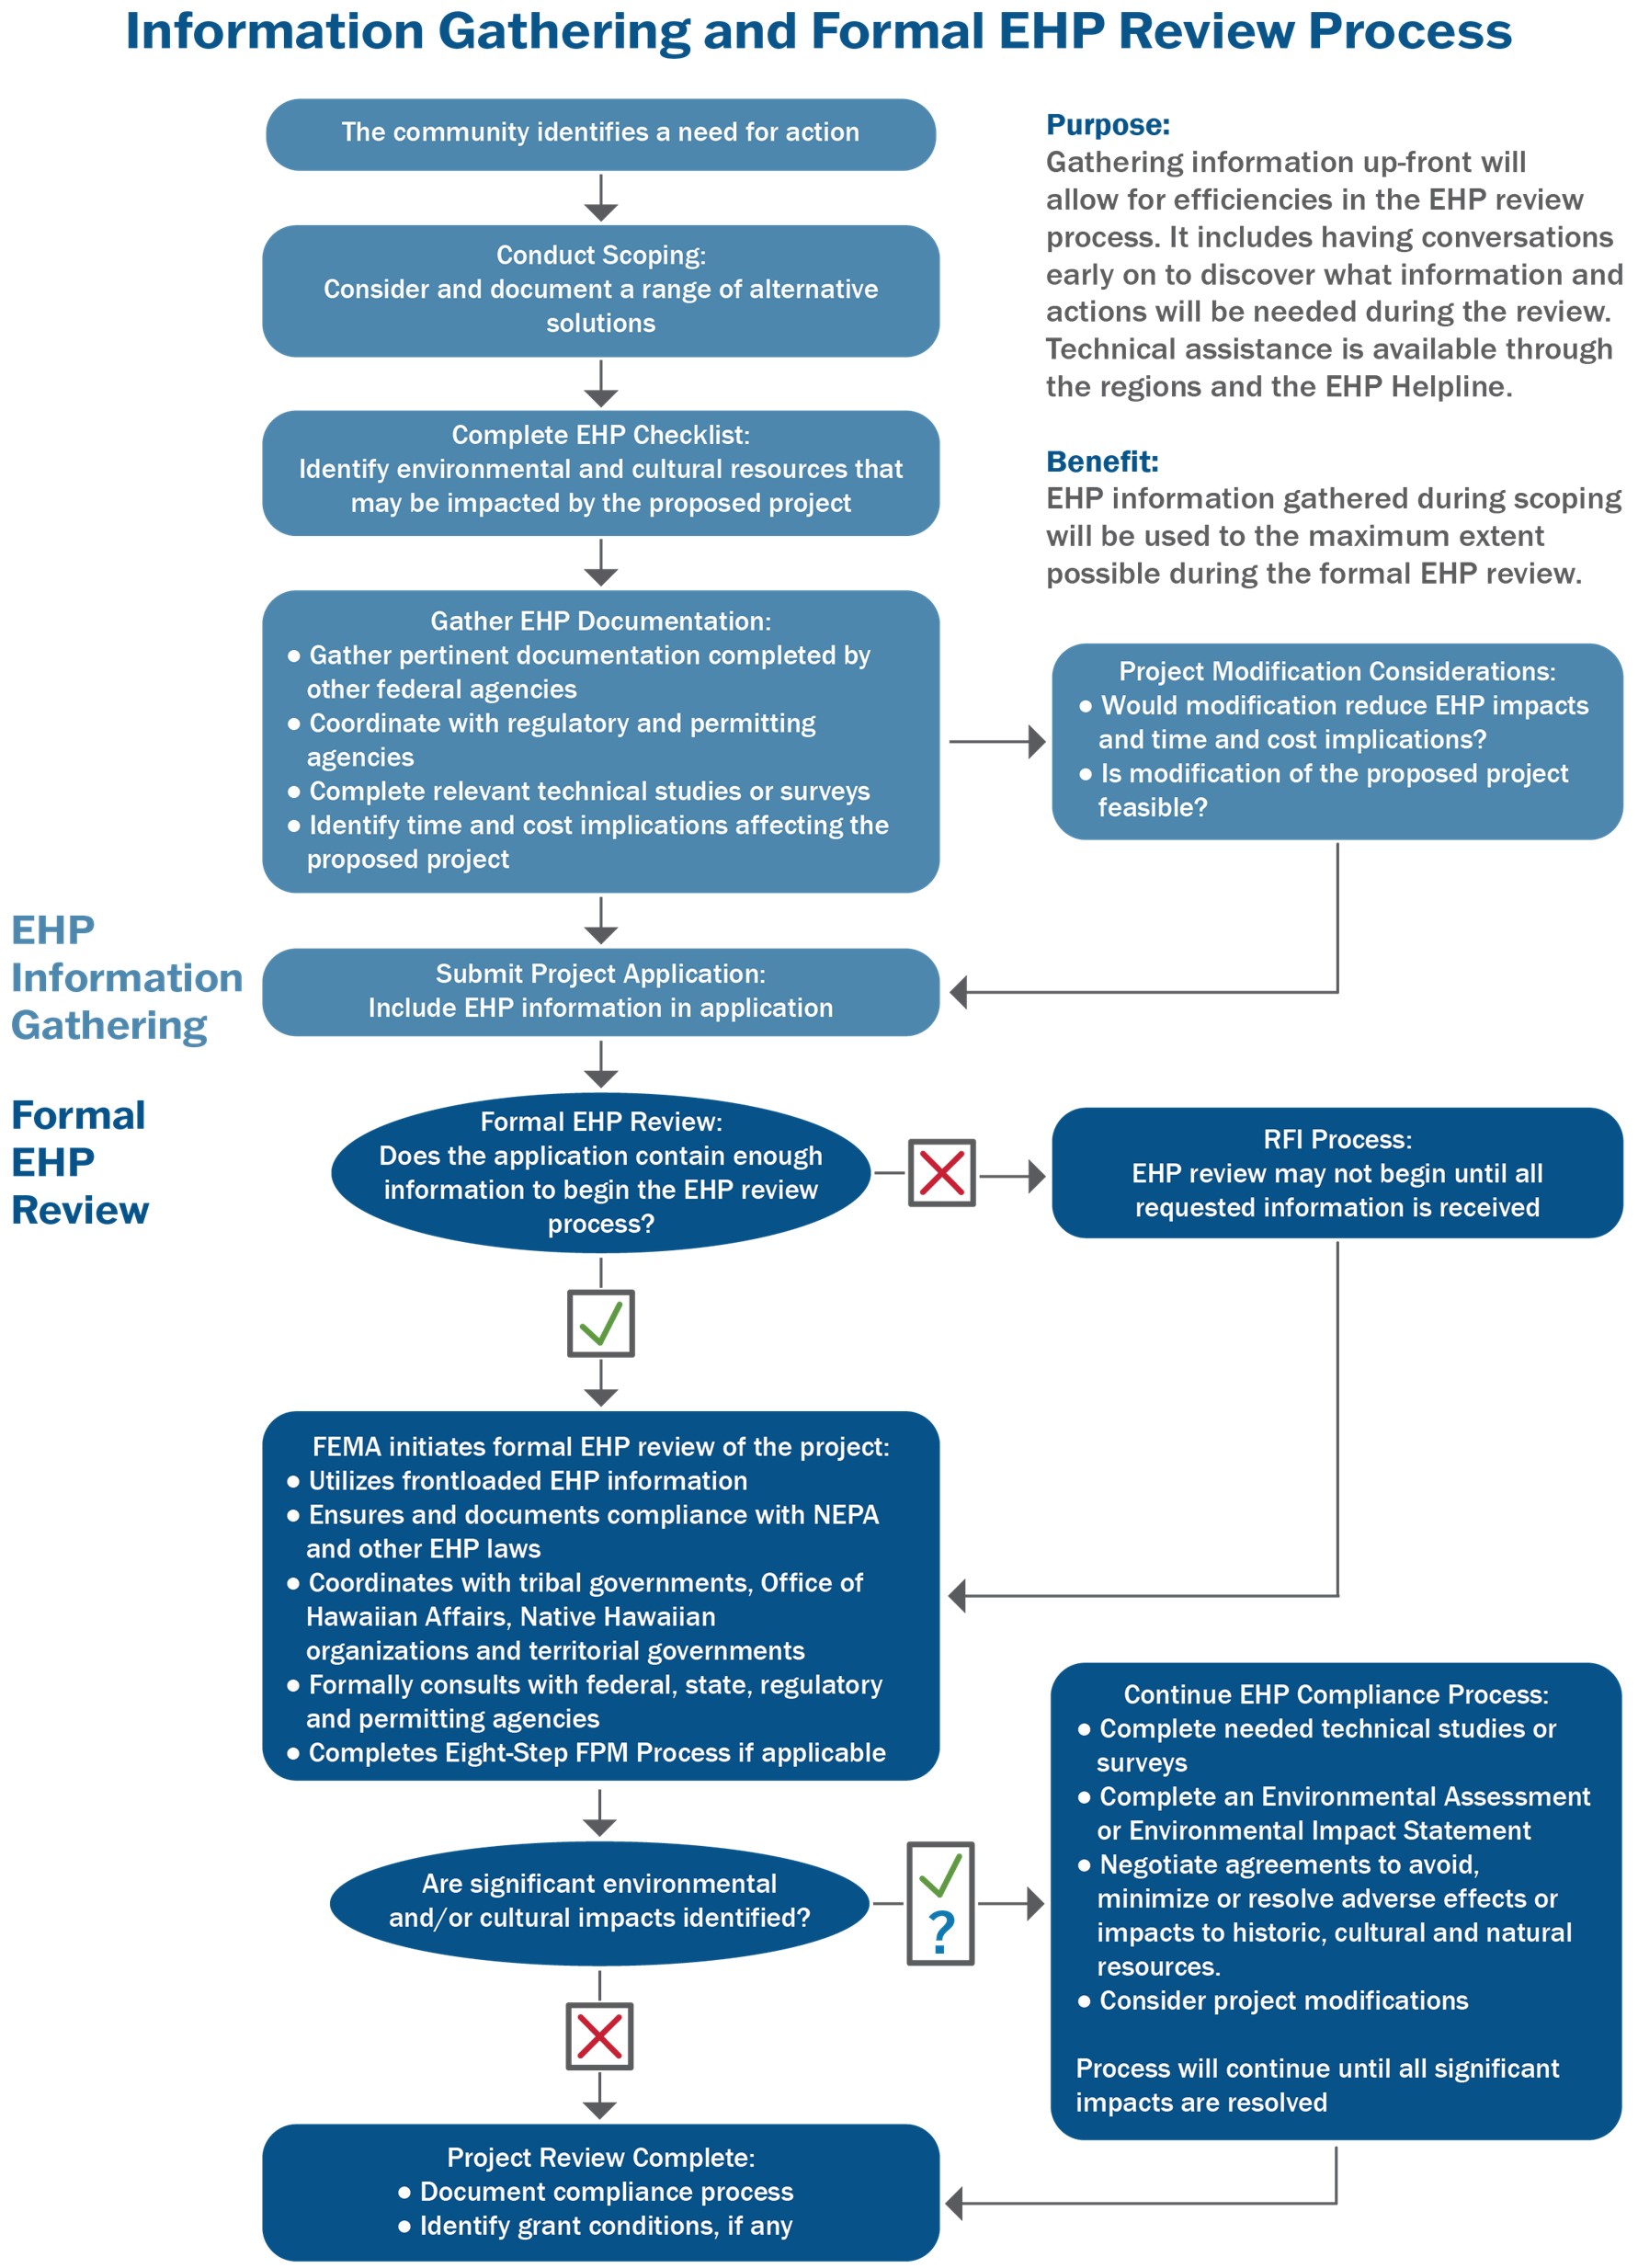 A flowchart which outlines the process for EHP information gathering and the formal EHP review processes. The EHP information gathering process includes scoping and gathering EHP documentation. The chart indicates that the formal EHP review may require an RFI process if the application does not contain enough information and may require additional EHP review if significant impacts are identified.